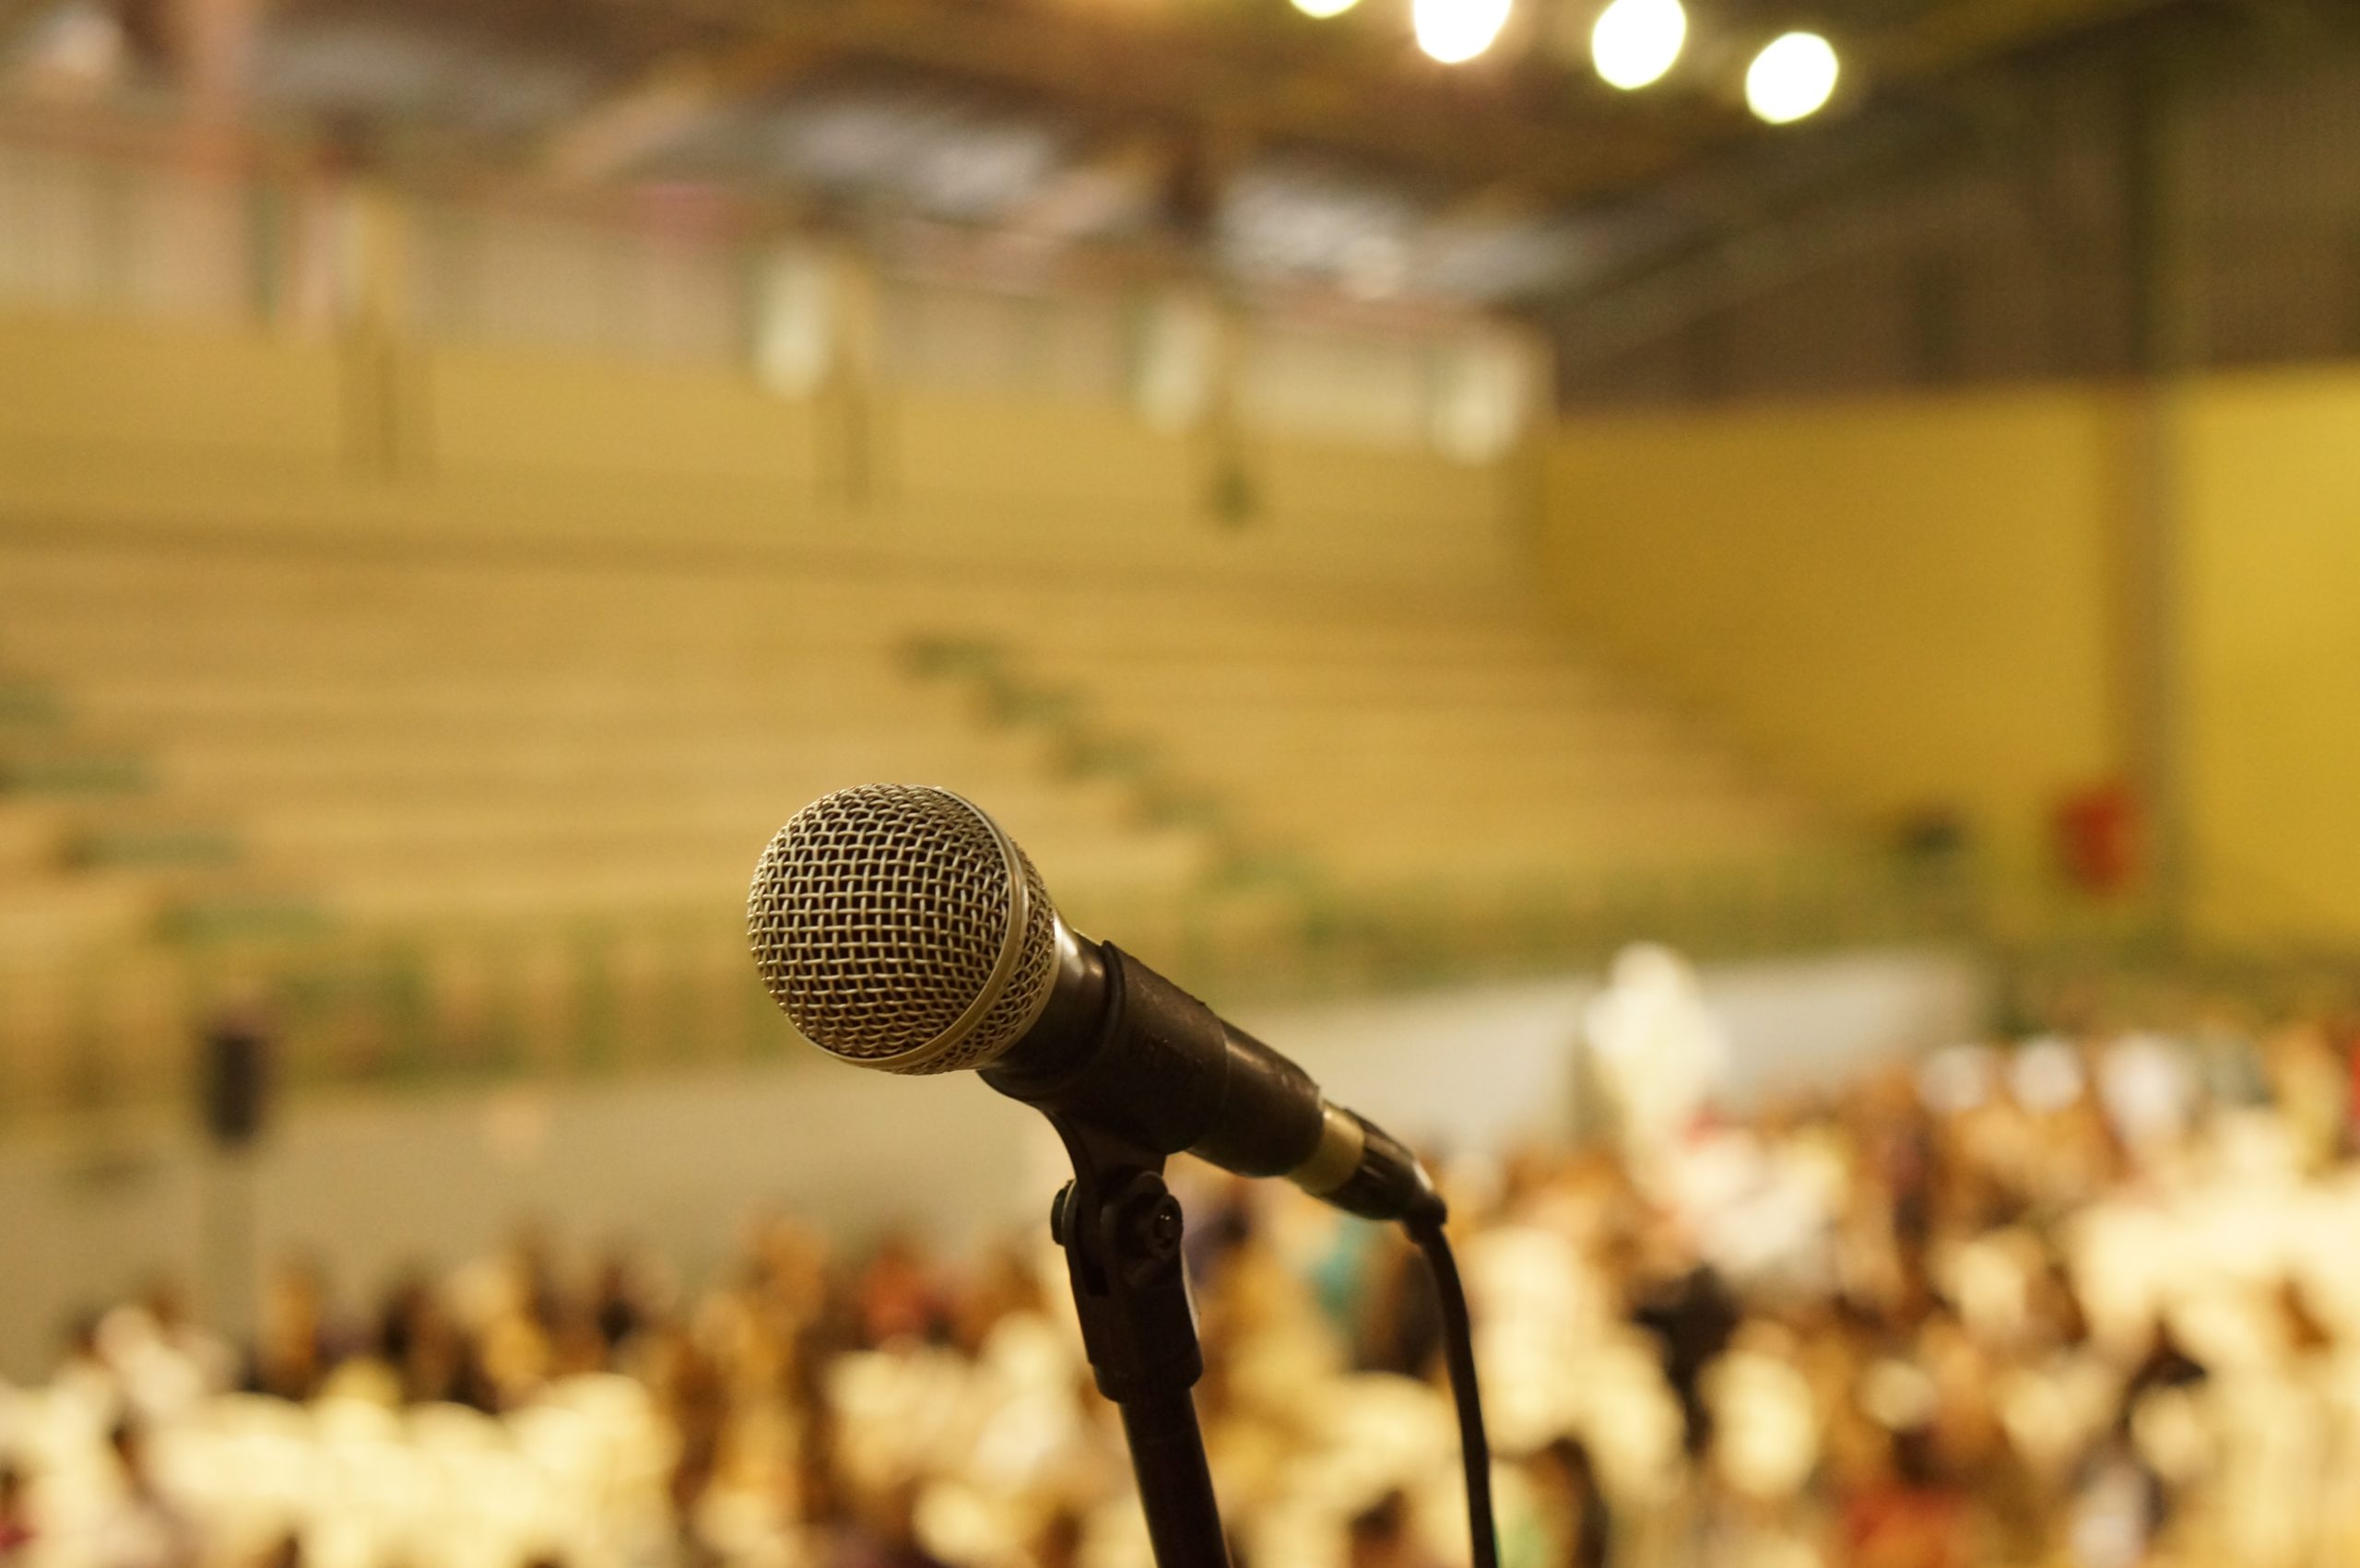 Microphone in front of conference crowd